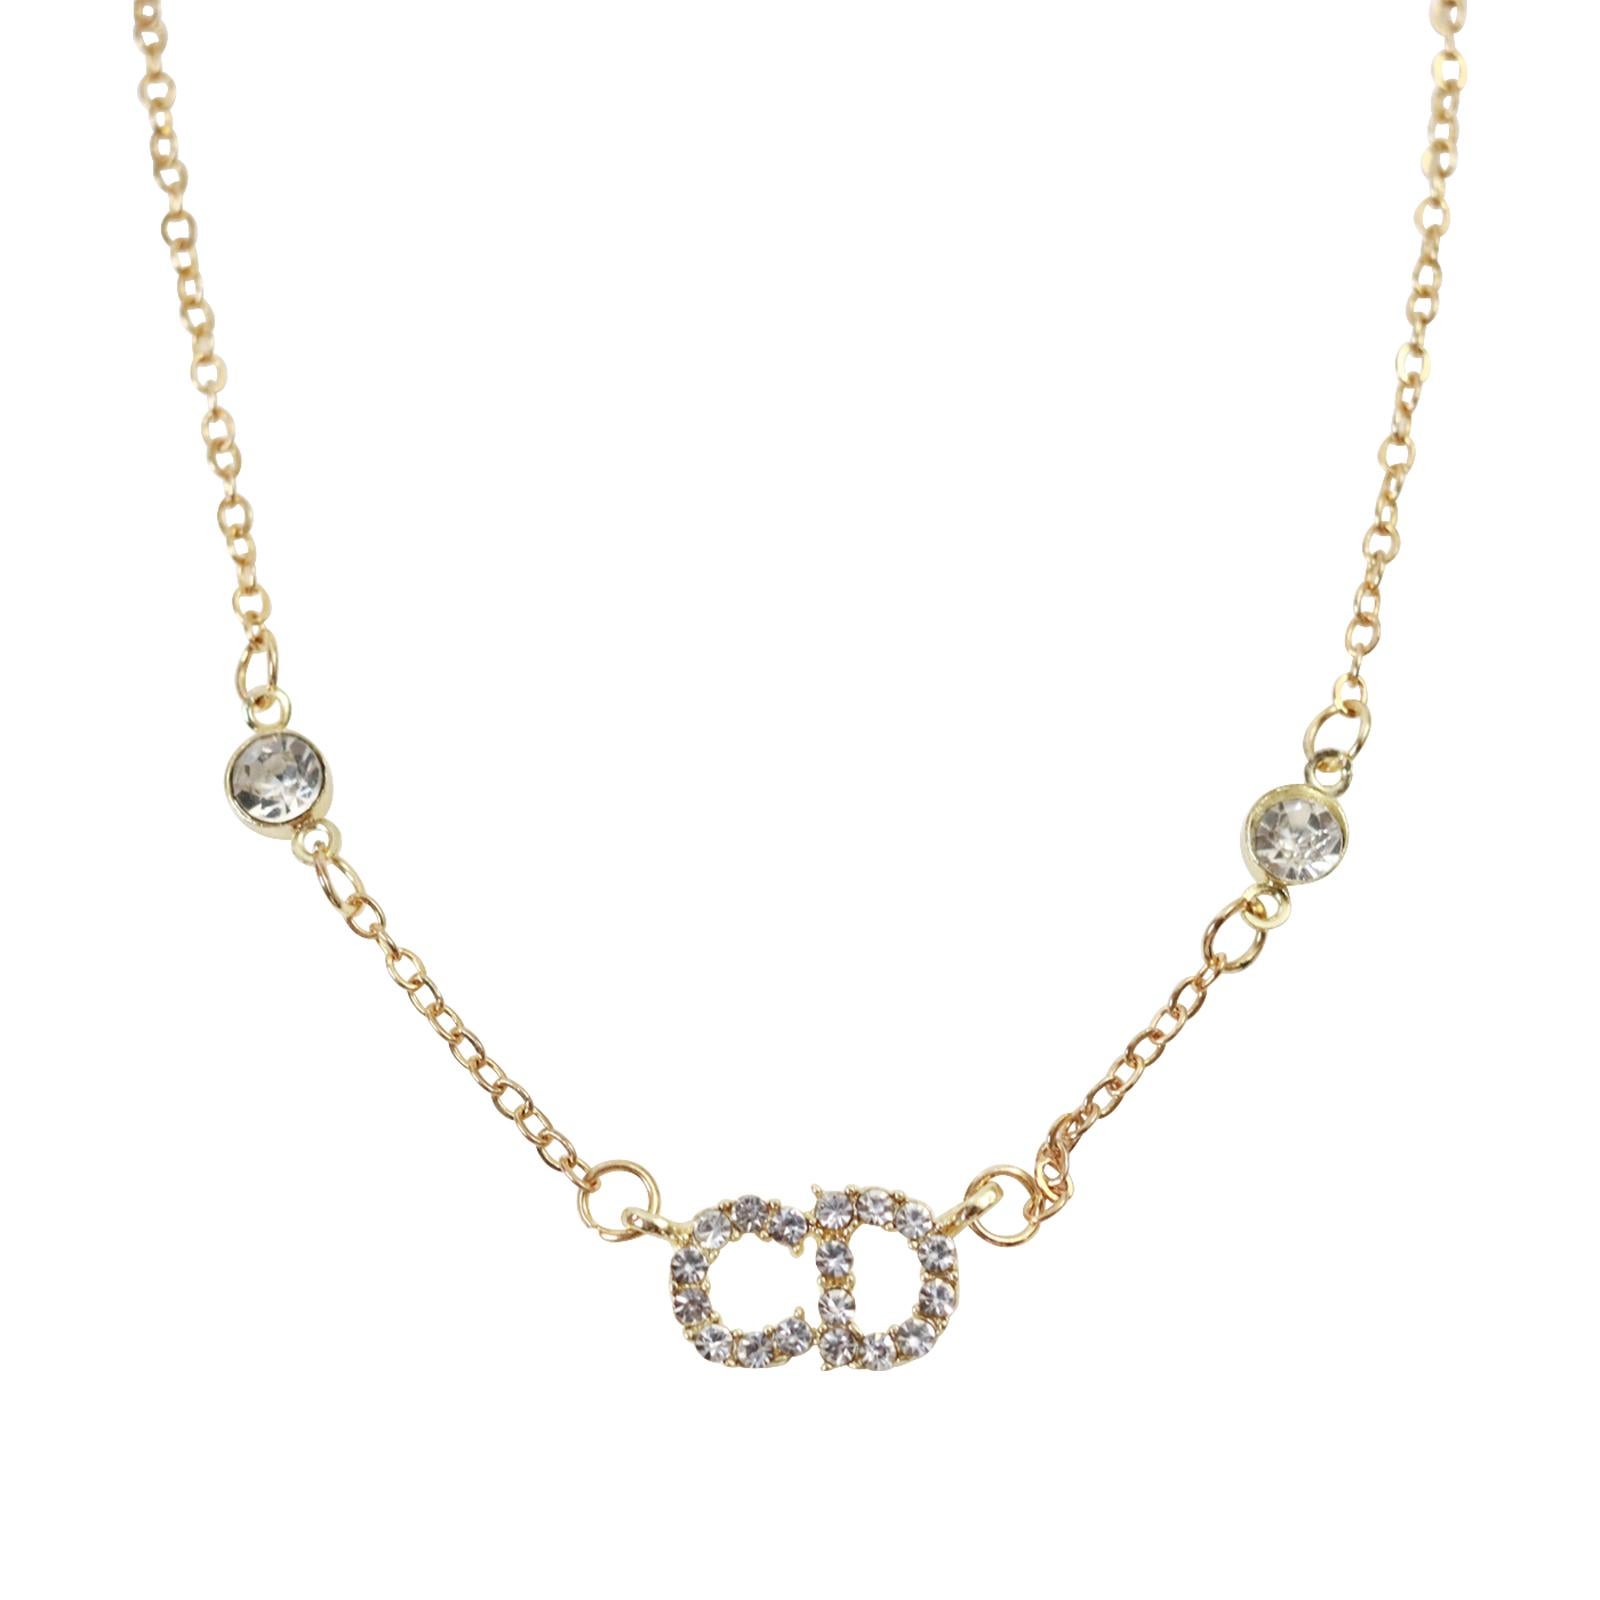 Clair D Lune Necklace Gold-Finish Metal and White Crystals - products | DIOR  | Designers jewelry collection, Girly jewelry, Necklace